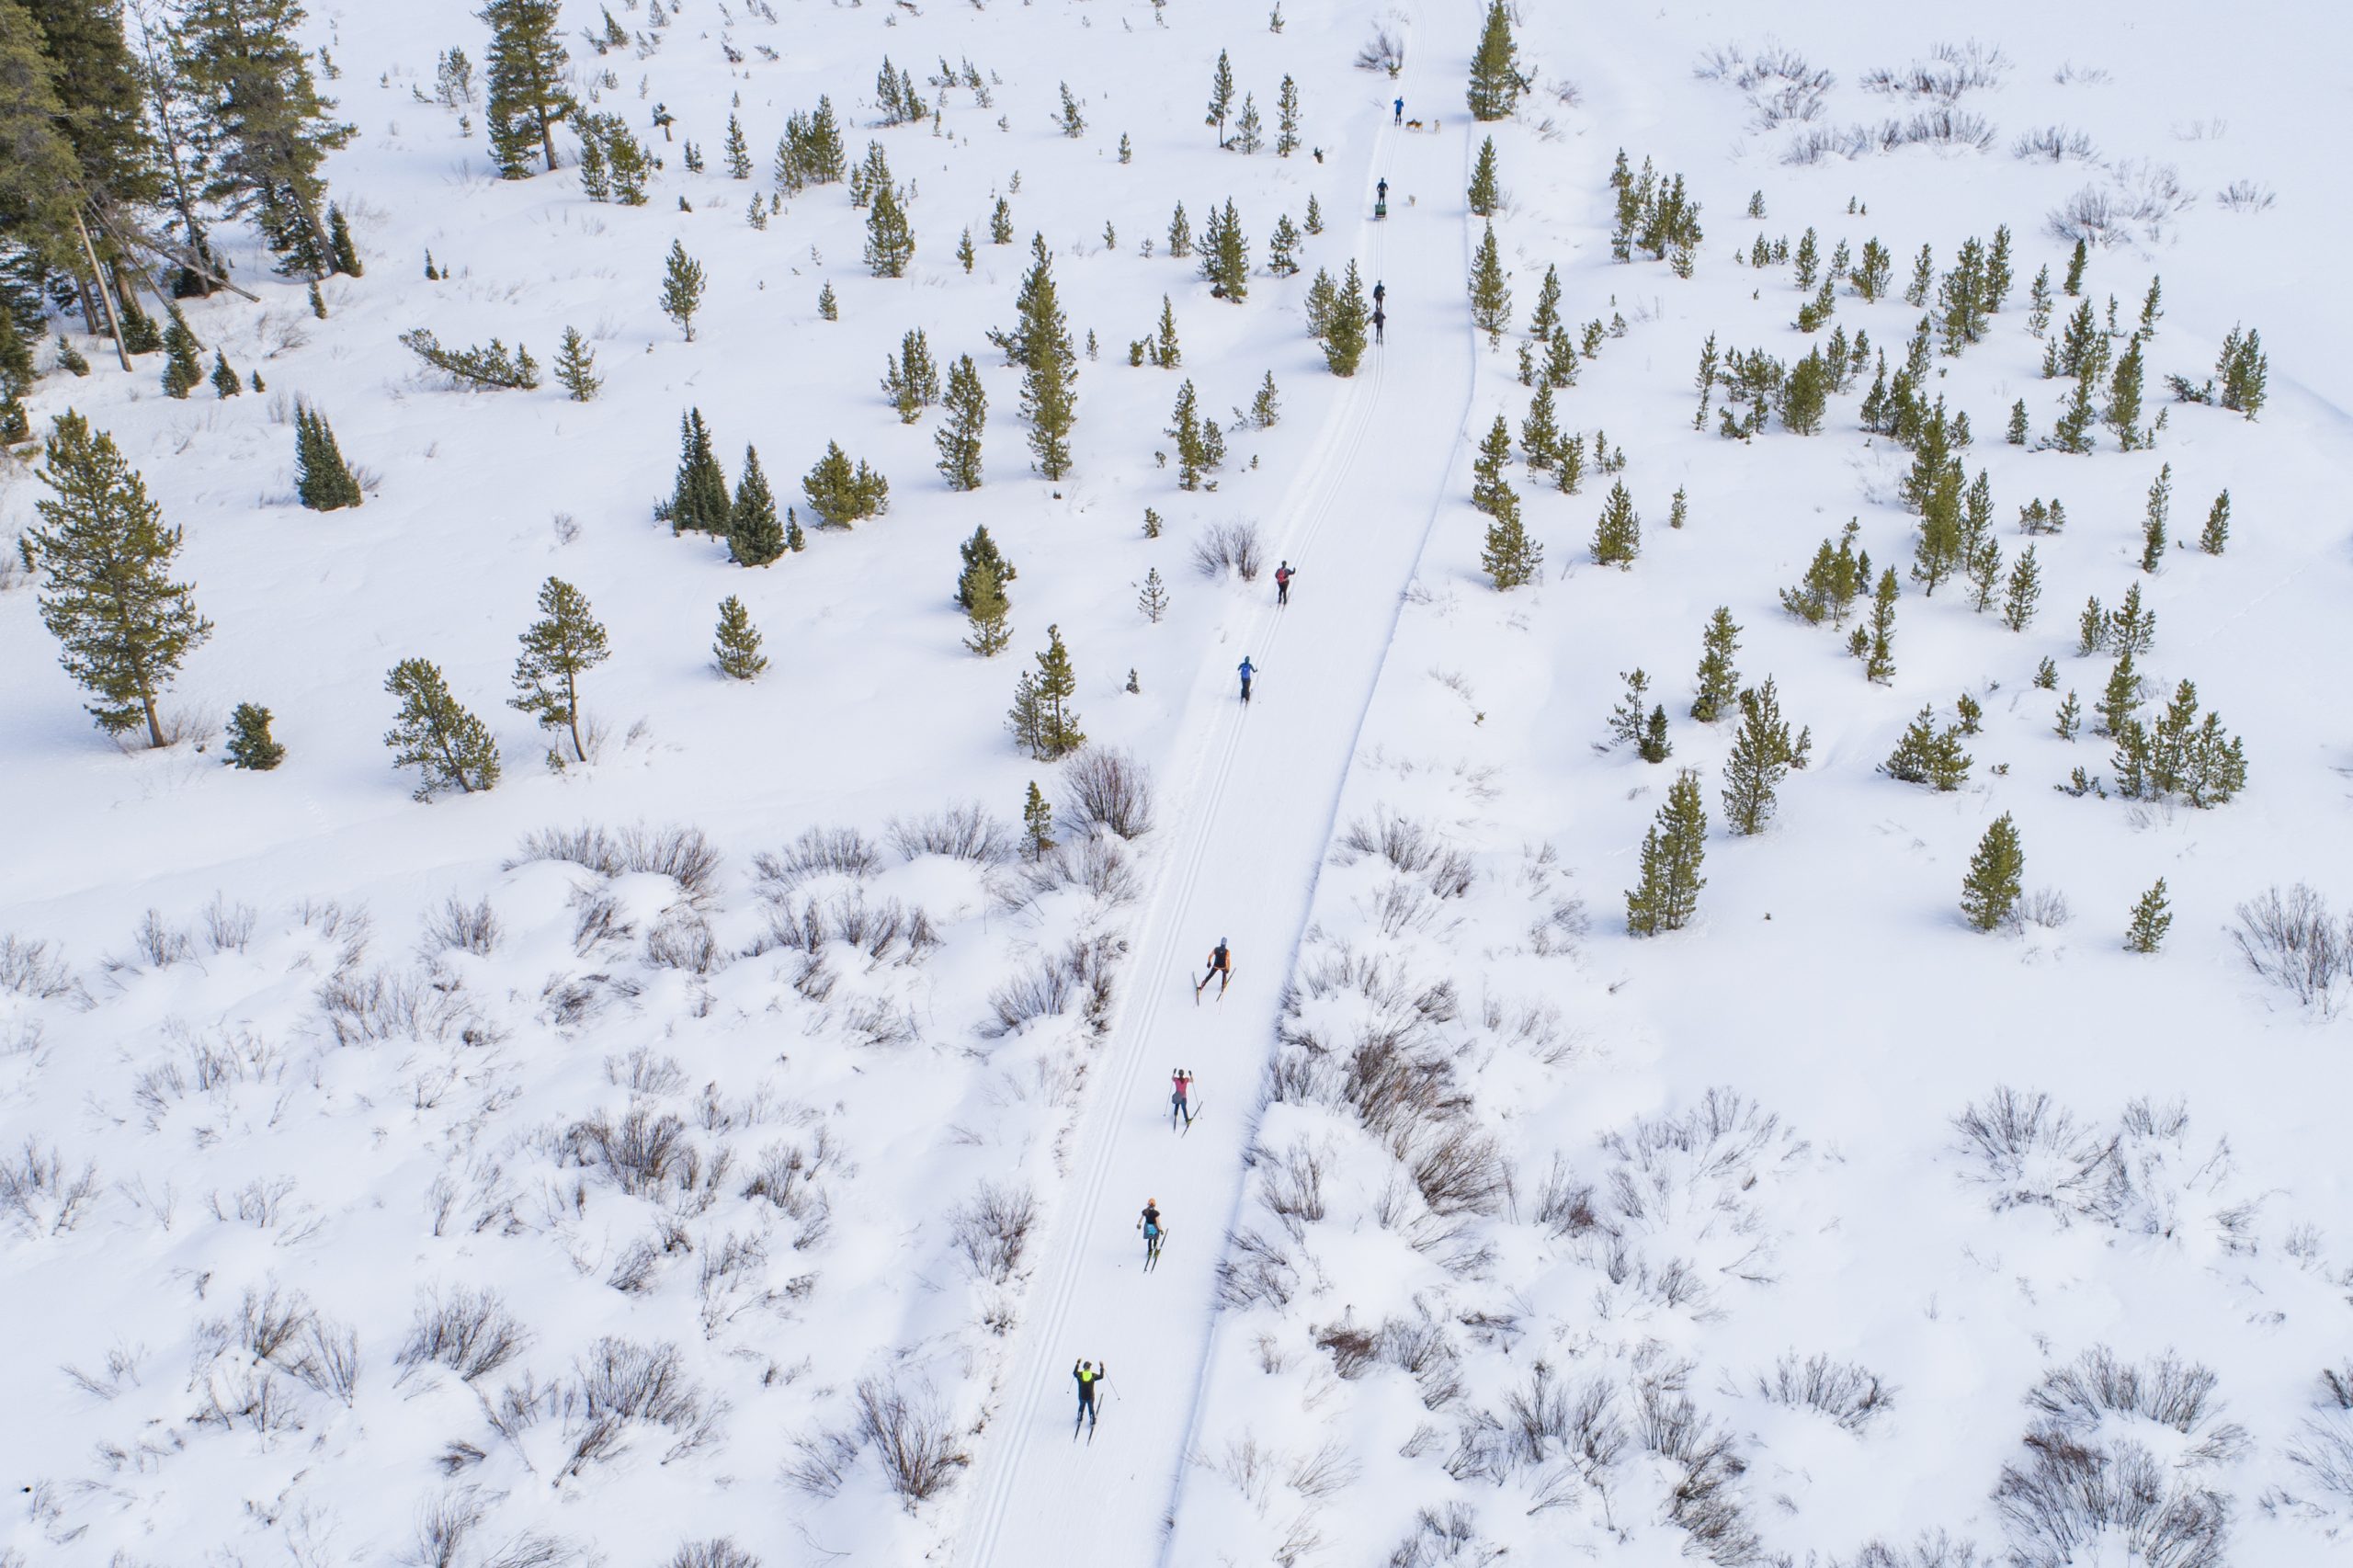 An aerial view of cross-country skiers on a groomed track. There are trees on each side of the track